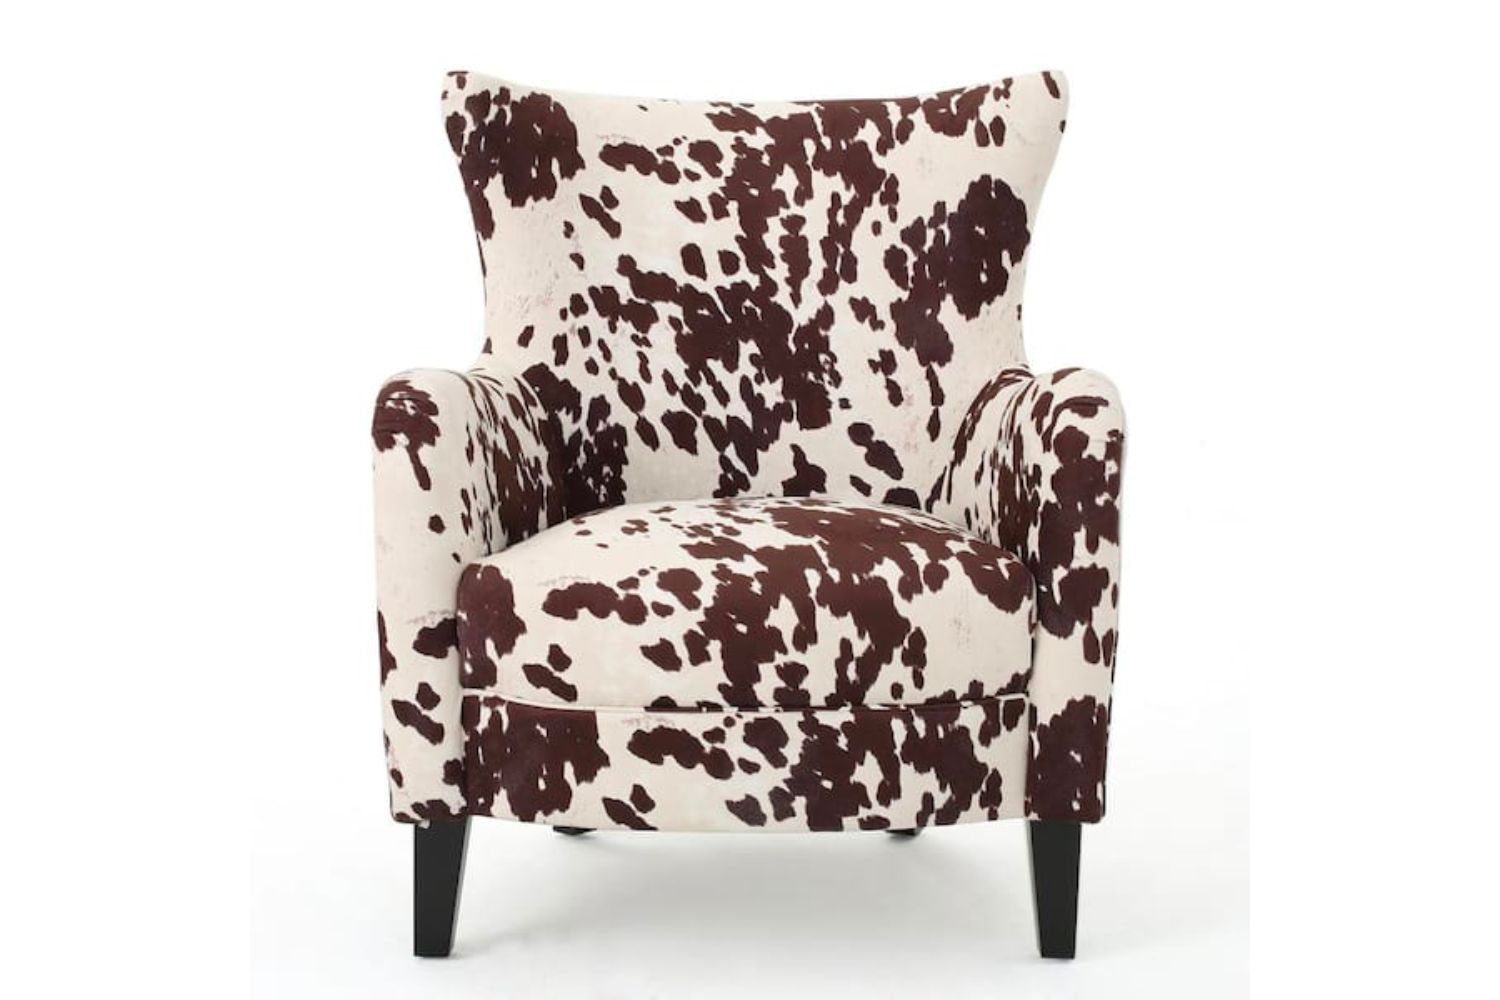 The Best Furniture You Can Find at Home Depot Right Now: Arabella Milk Cow and Dark Brown Velvet Club Chair